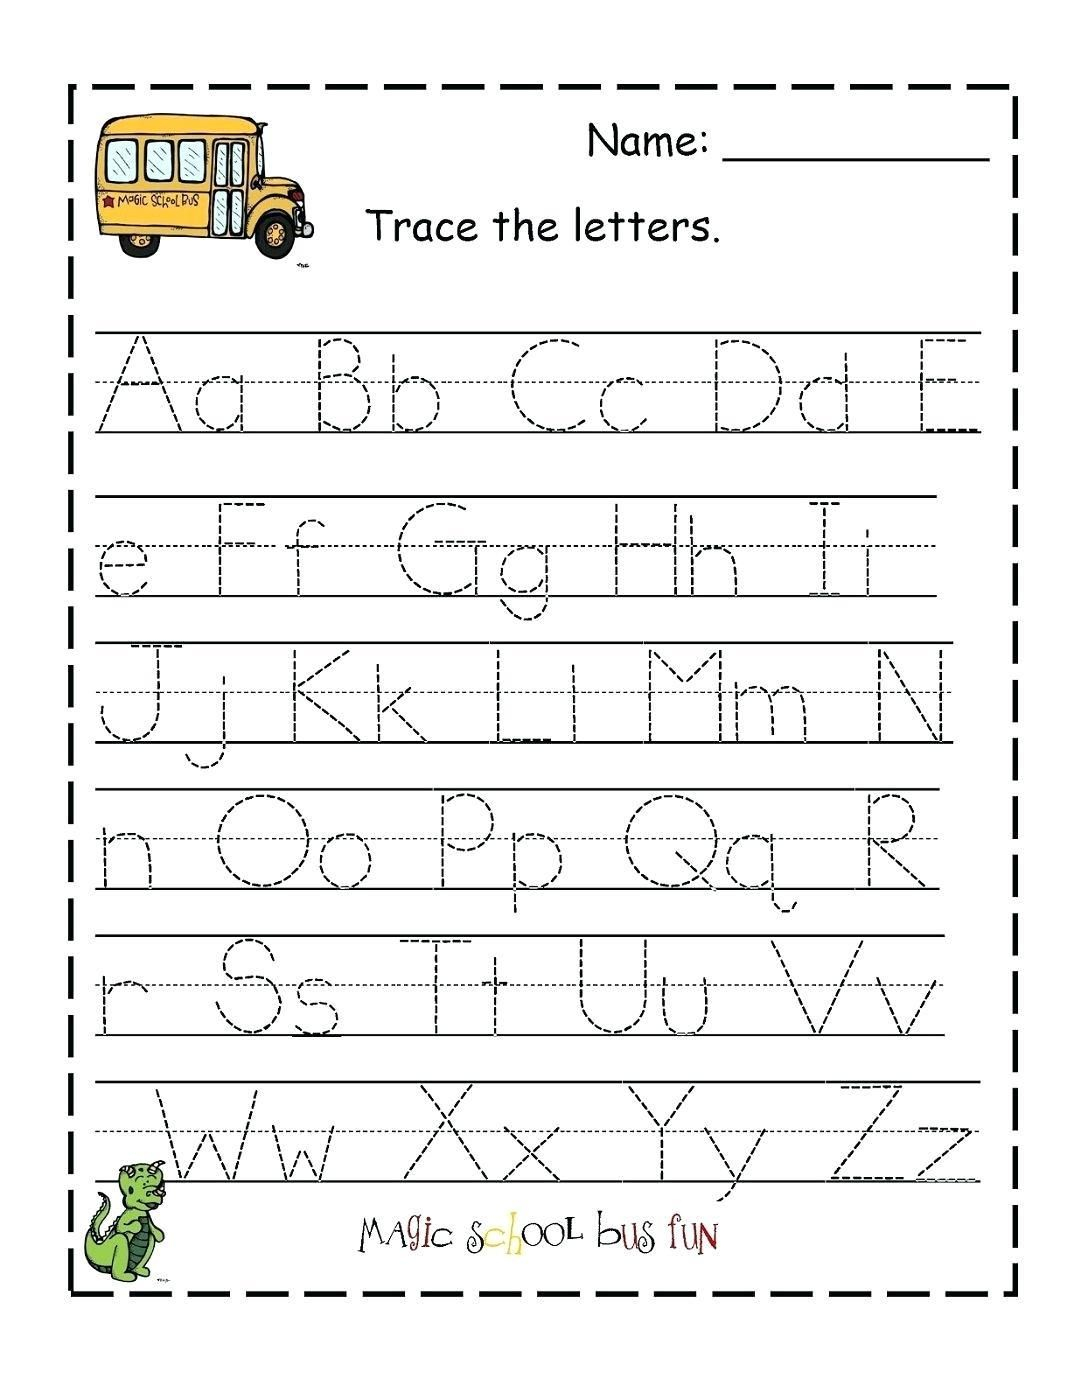 Awesome Alphabet Tracing Workbook That You Must Know, You're